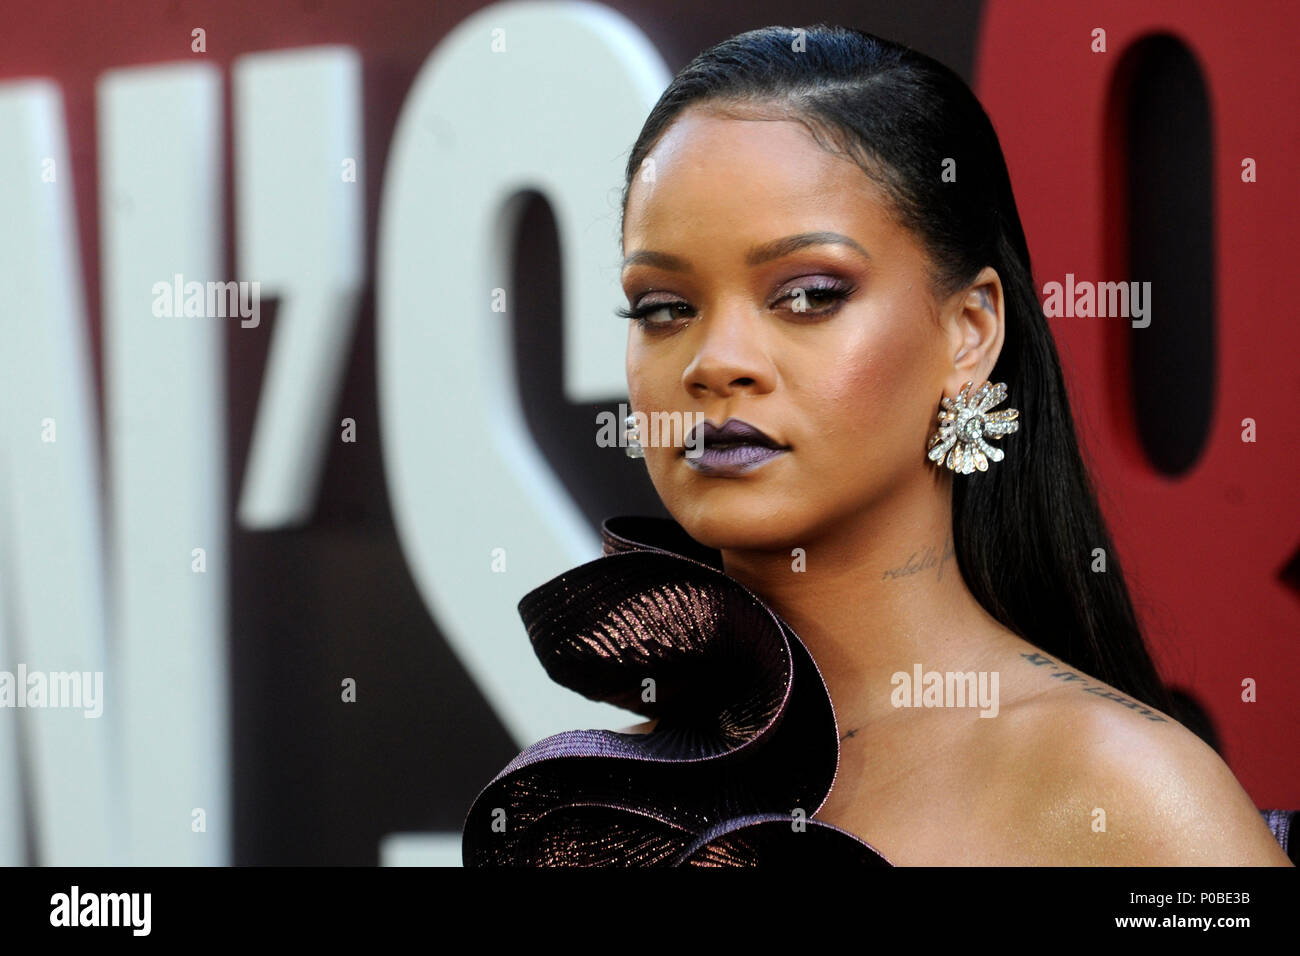 Rihanna attending the world premiere of 'Ocean's 8' at Alice Tully Hall at Lincoln Center on June 5, 2018 in New York City. Stock Photo